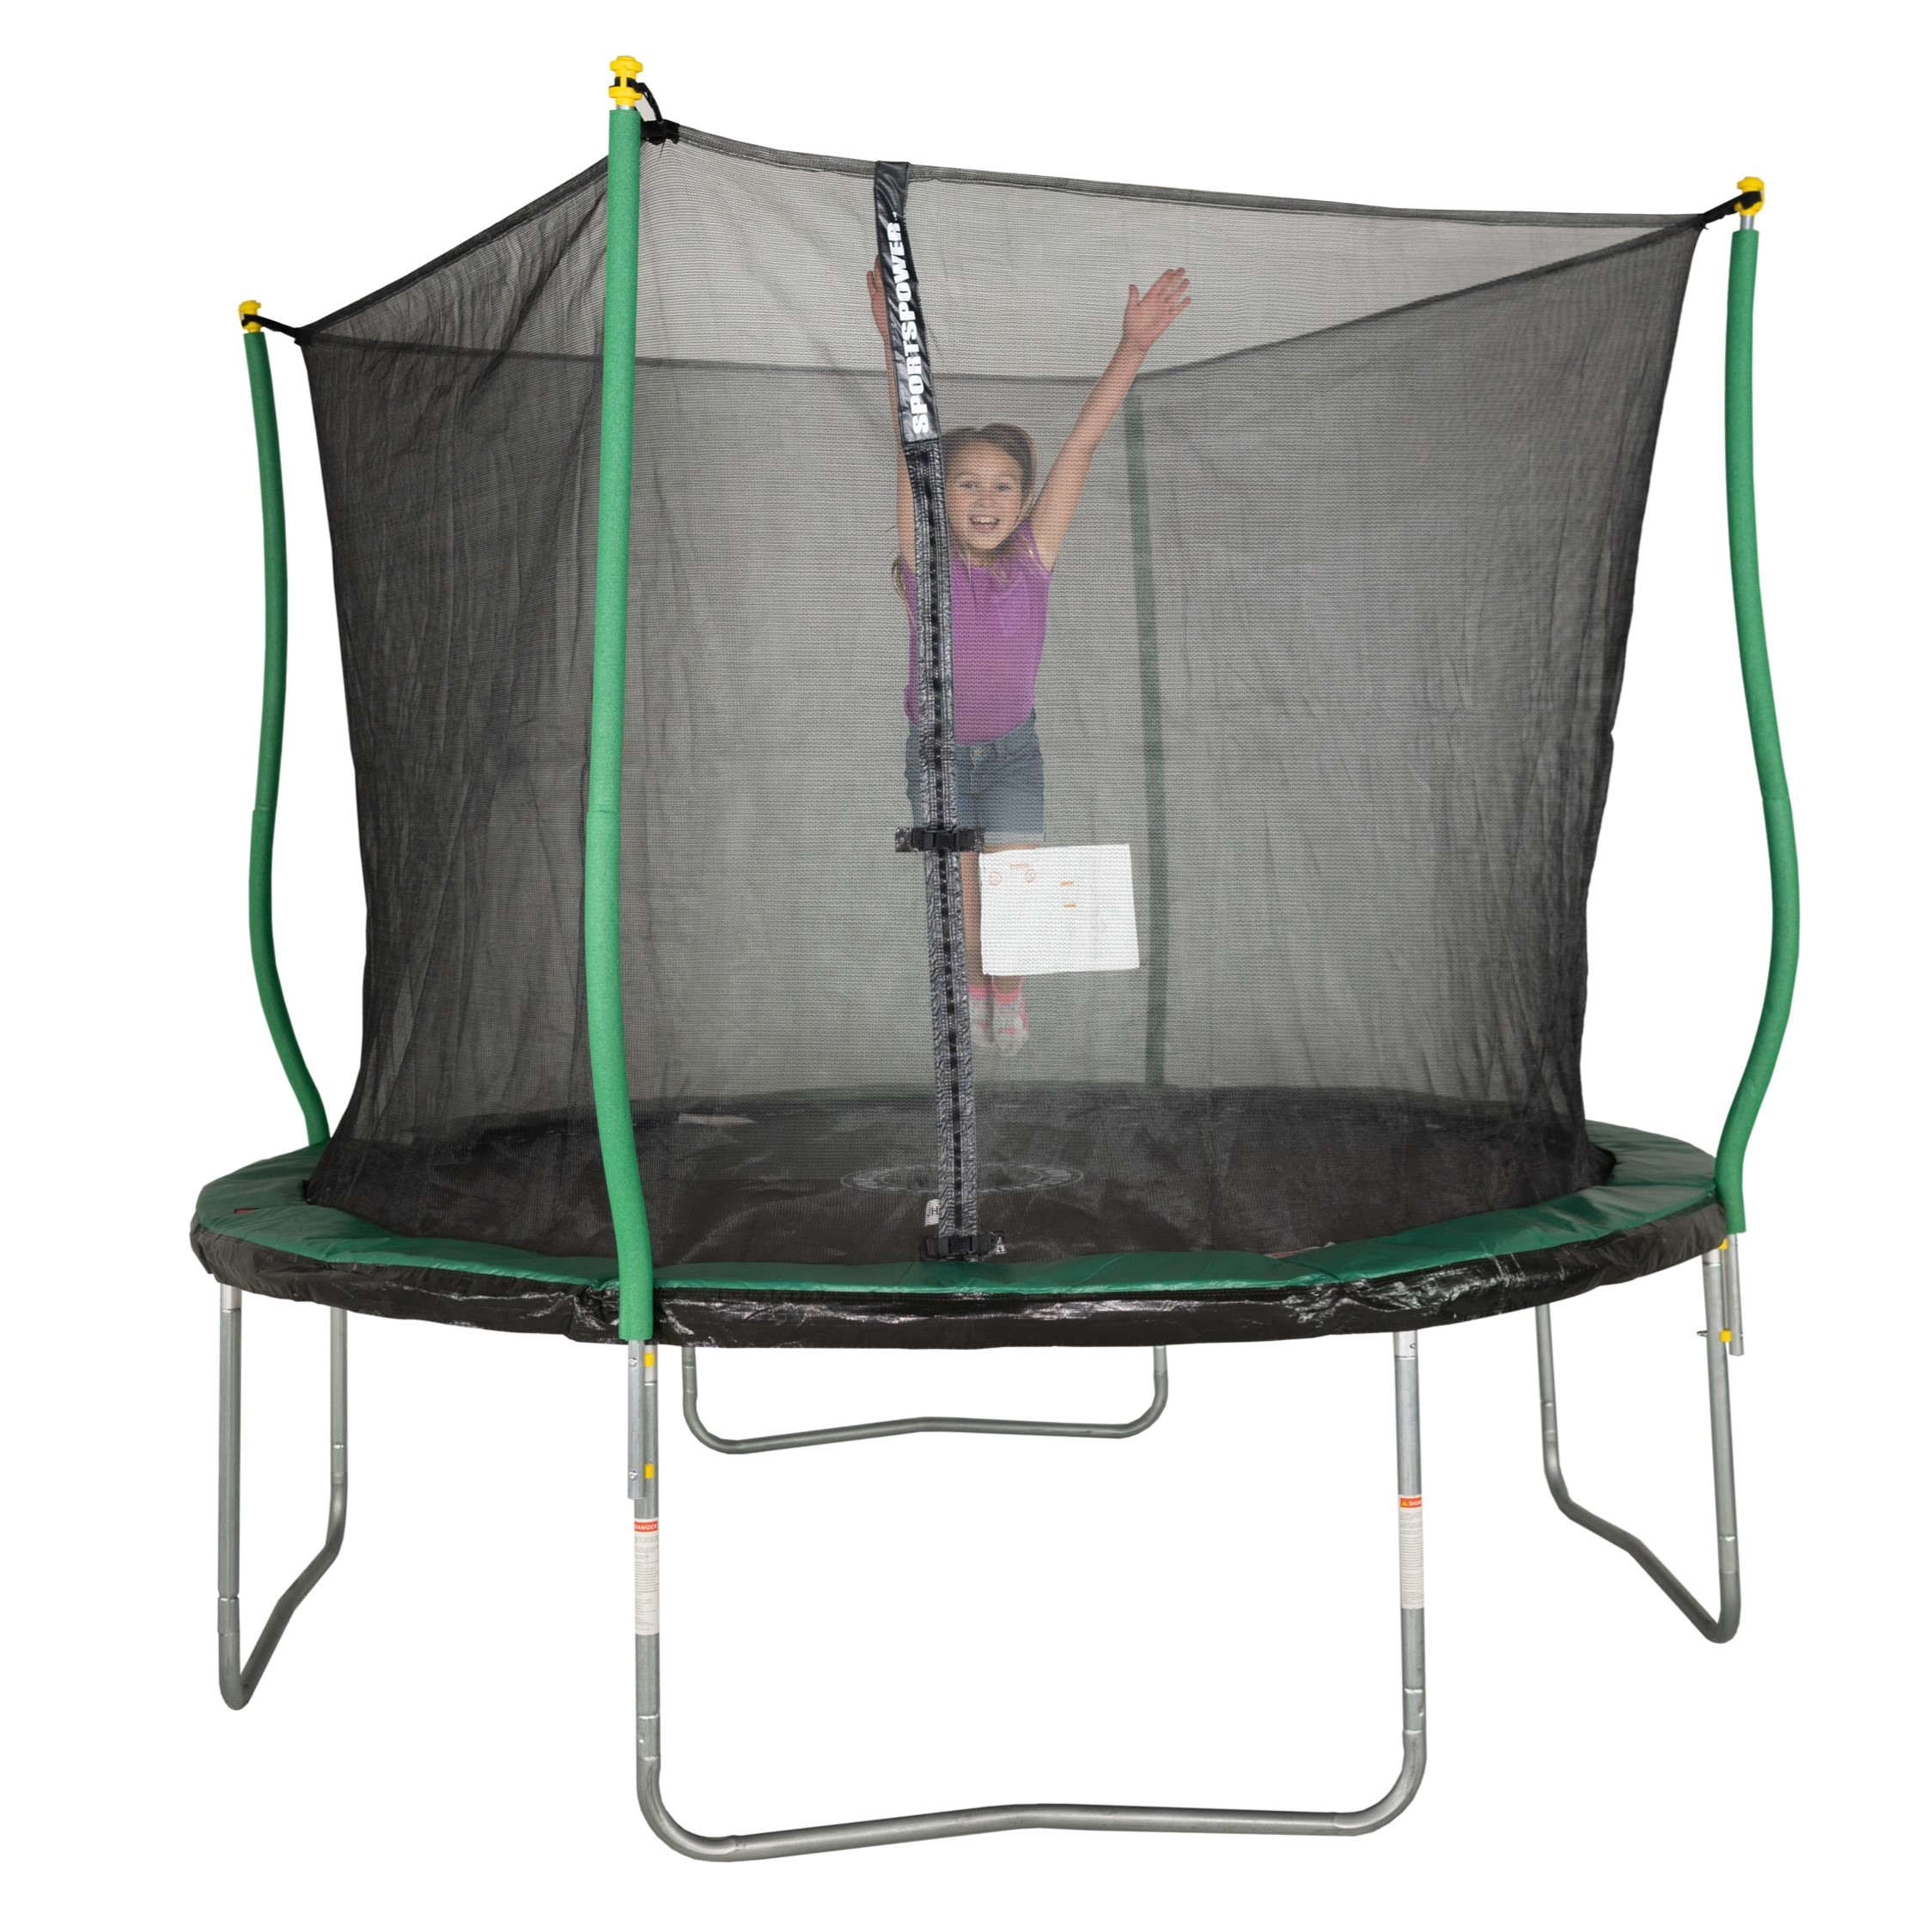 Bounce Pro 10' Trampoline, Flash Light Zone, Classic Safety Enclosure, Green/Black - image 1 of 9